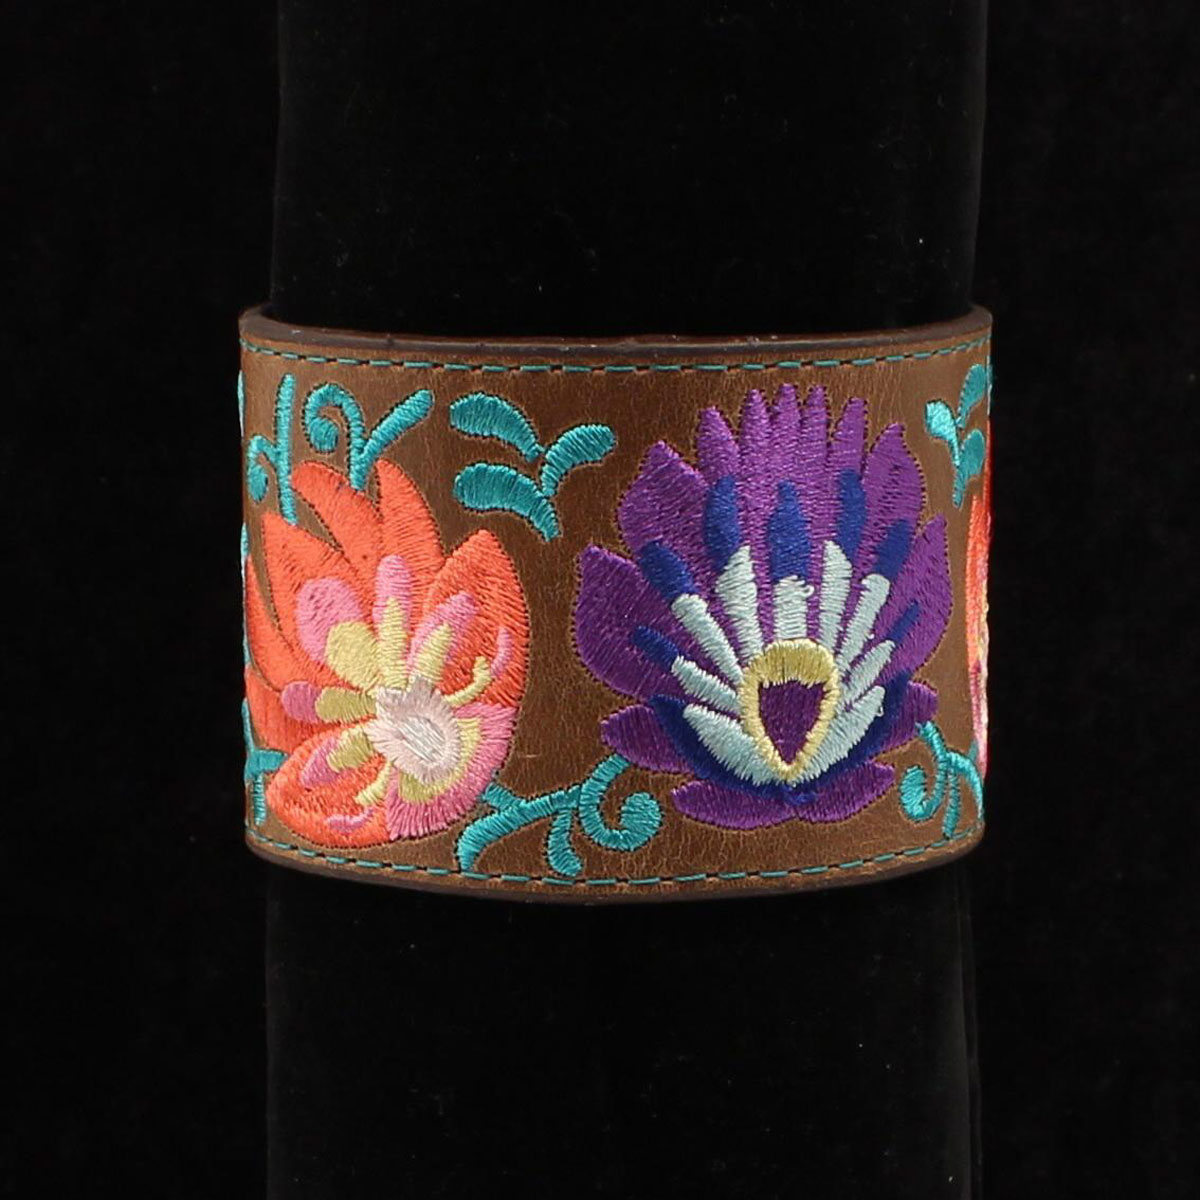 Dbr718 Medium Brown Leather Cuff With Floral Embrossed Beaded